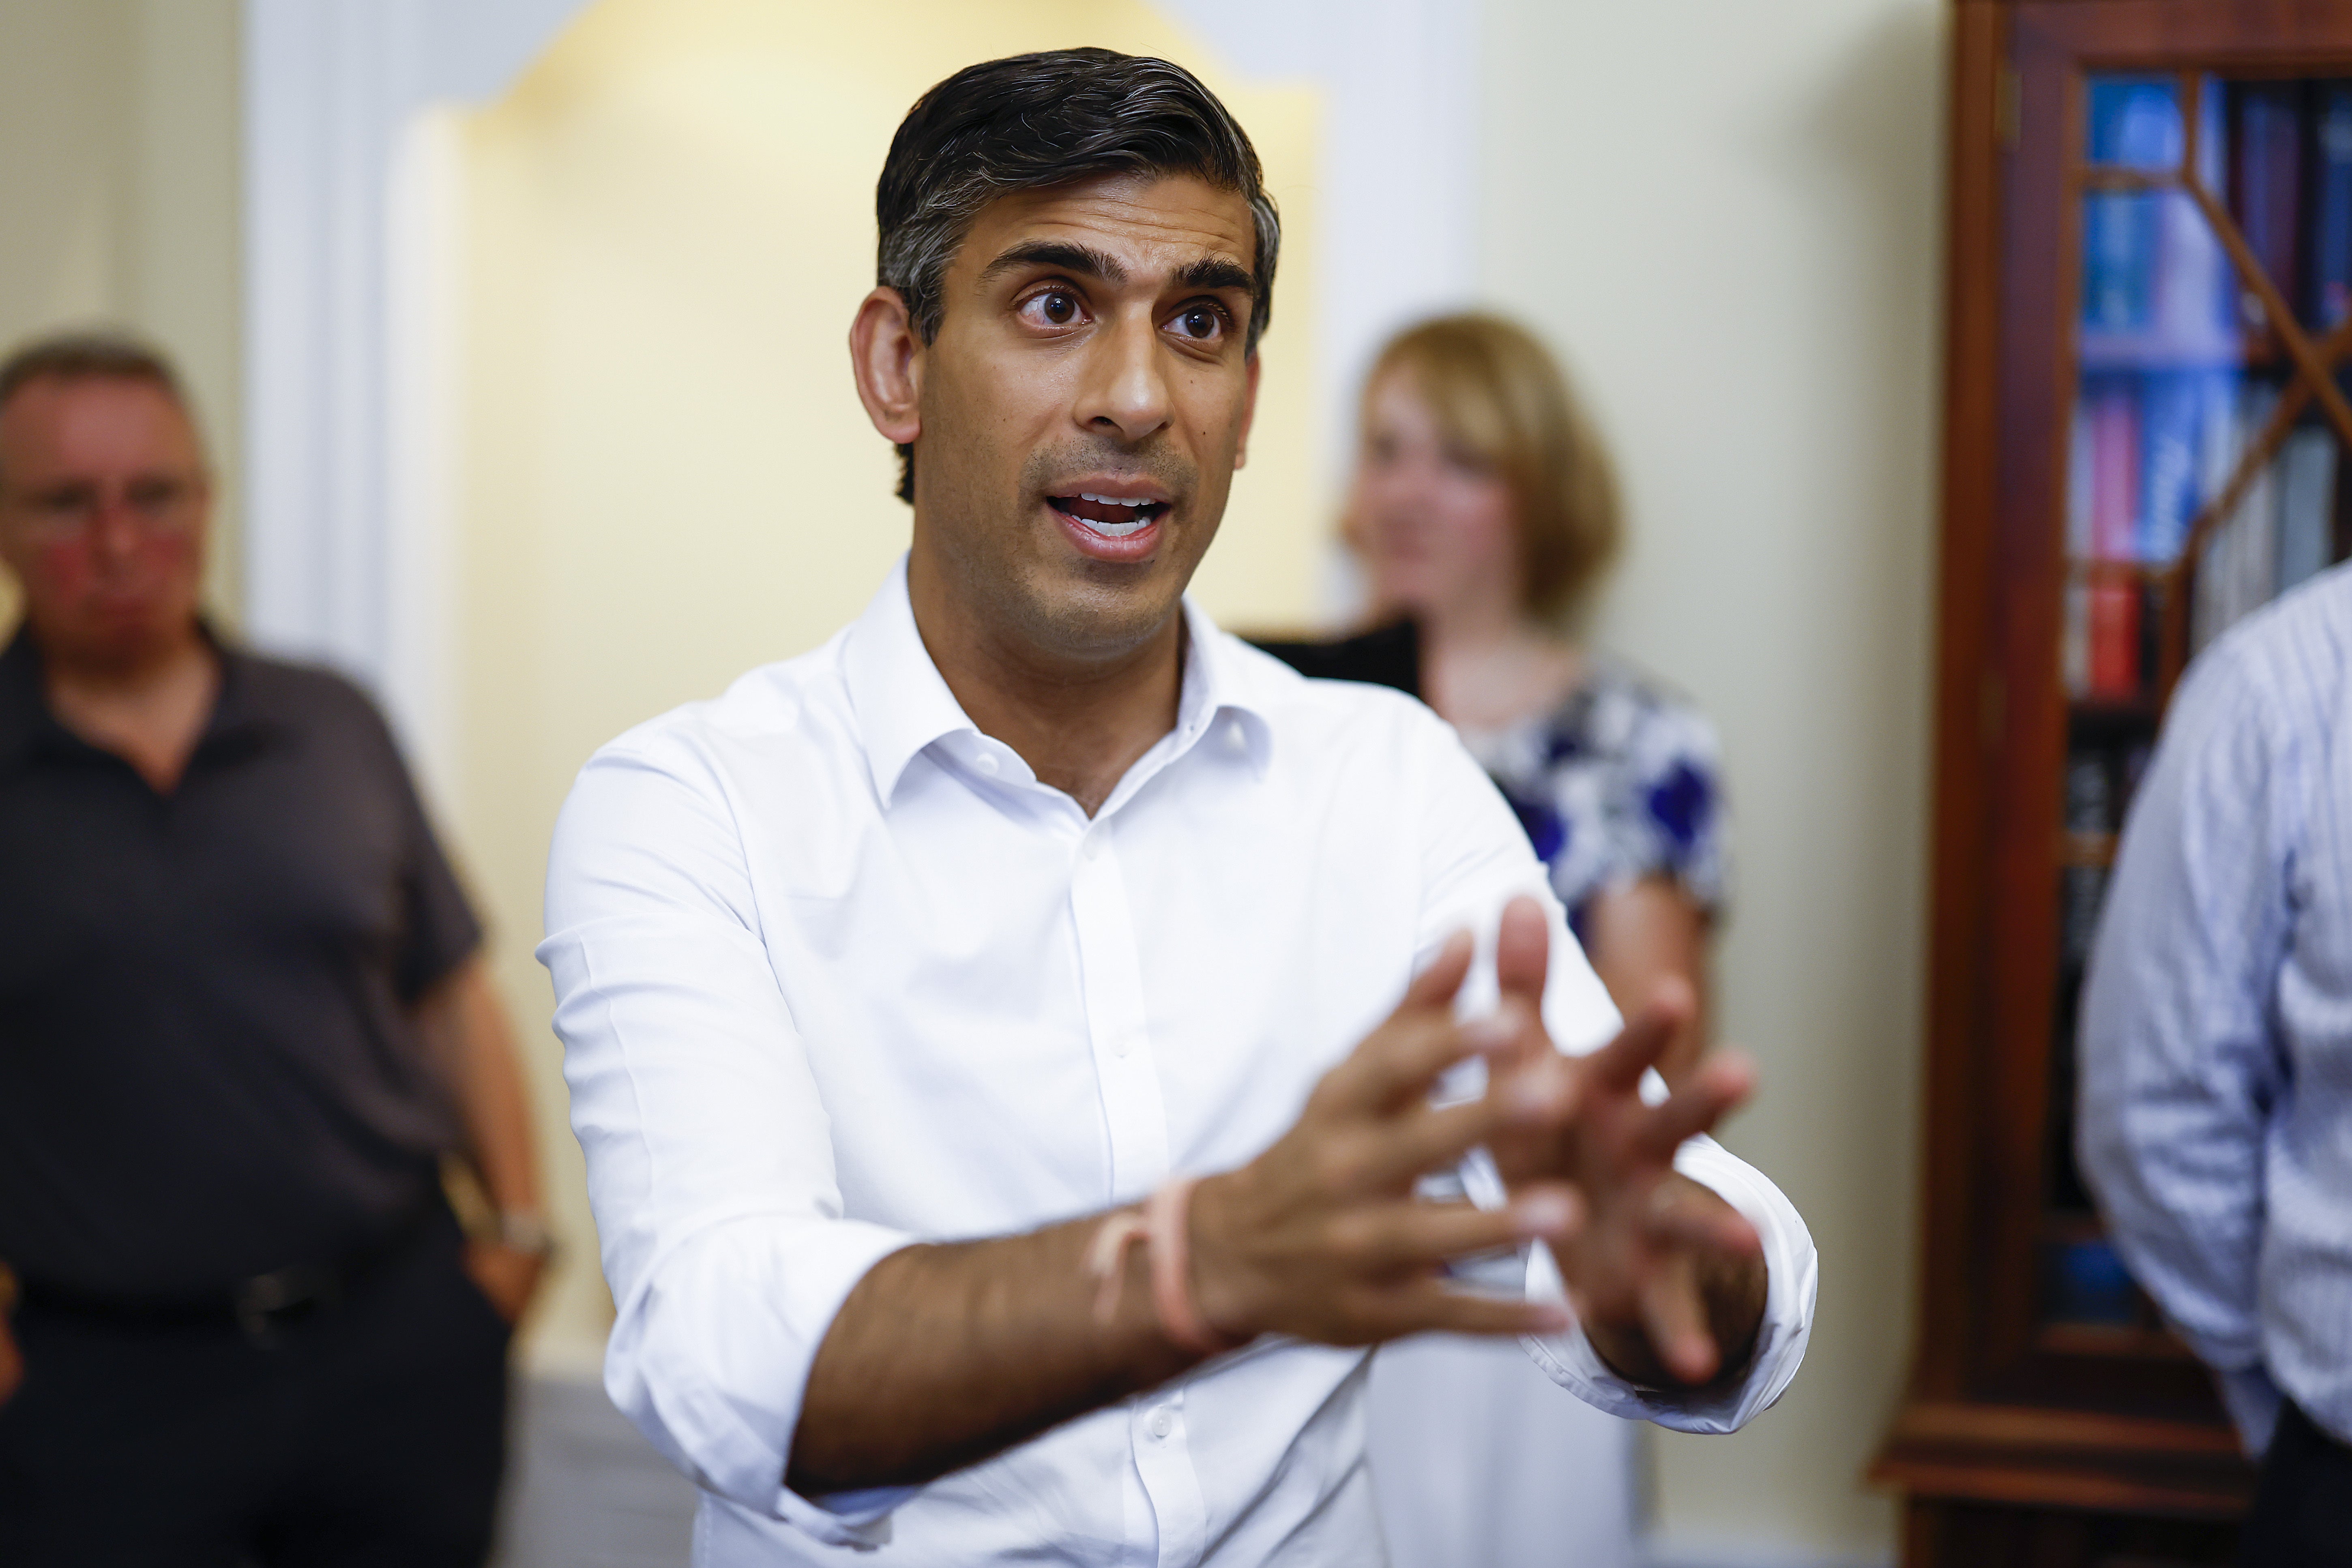 Rishi Sunak has said he will act to support families through the winter (Jeff J Mitchell/PA)